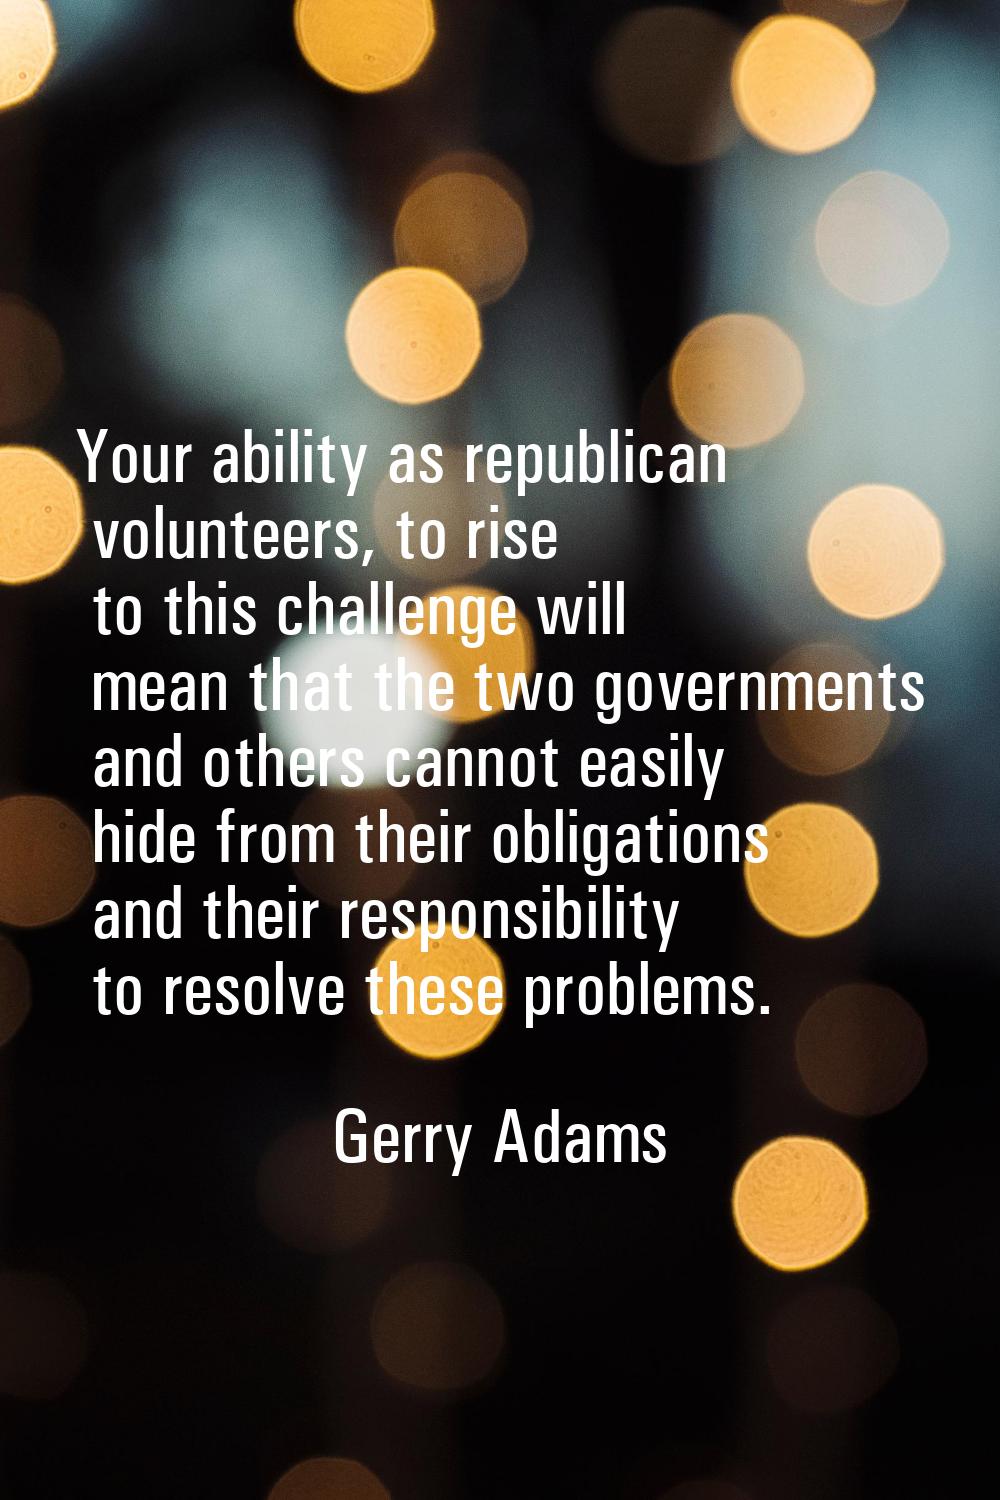 Your ability as republican volunteers, to rise to this challenge will mean that the two governments